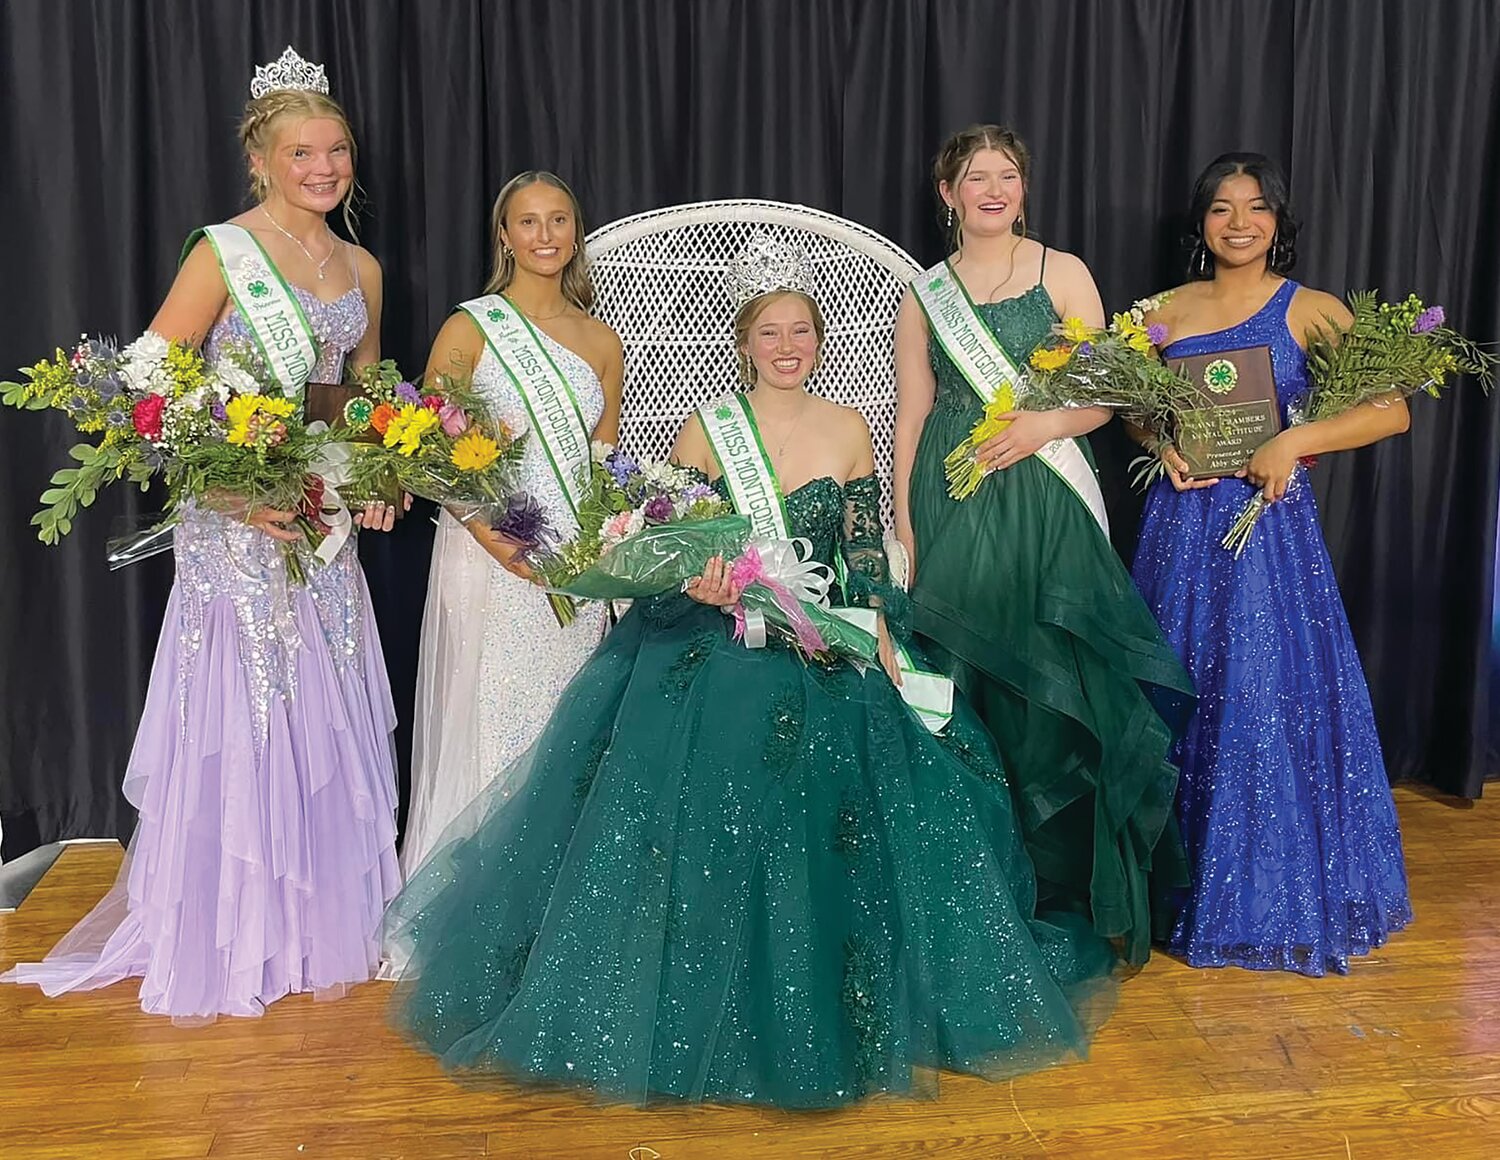 Jessie Bradley, seated, was named the 2024 Miss Montgomery County and Miss Congeniality on Saturday. She is pictured with her court, from left, Princess Caelyn Carpenter; first runner-up Peri McClaskey; second runner-up Miranda Crowe; and Abby Sayler, who along with Carpenter, earned the Elaine Chambers Mental Attitude Award. Bradley is the daughter of Brian and Pam Bradley. She is a recent Southmont High School graduate and will be a freshman this fall at Purdue University. She is a 10-year 4-H member whose projects have included goats, swine, sheep, sewing, Fashion Revue, foods, crafts and floriculture. Bradley and her court will reign over the Montgomery County 4-H Fair, which begins Friday and continues through July 17.